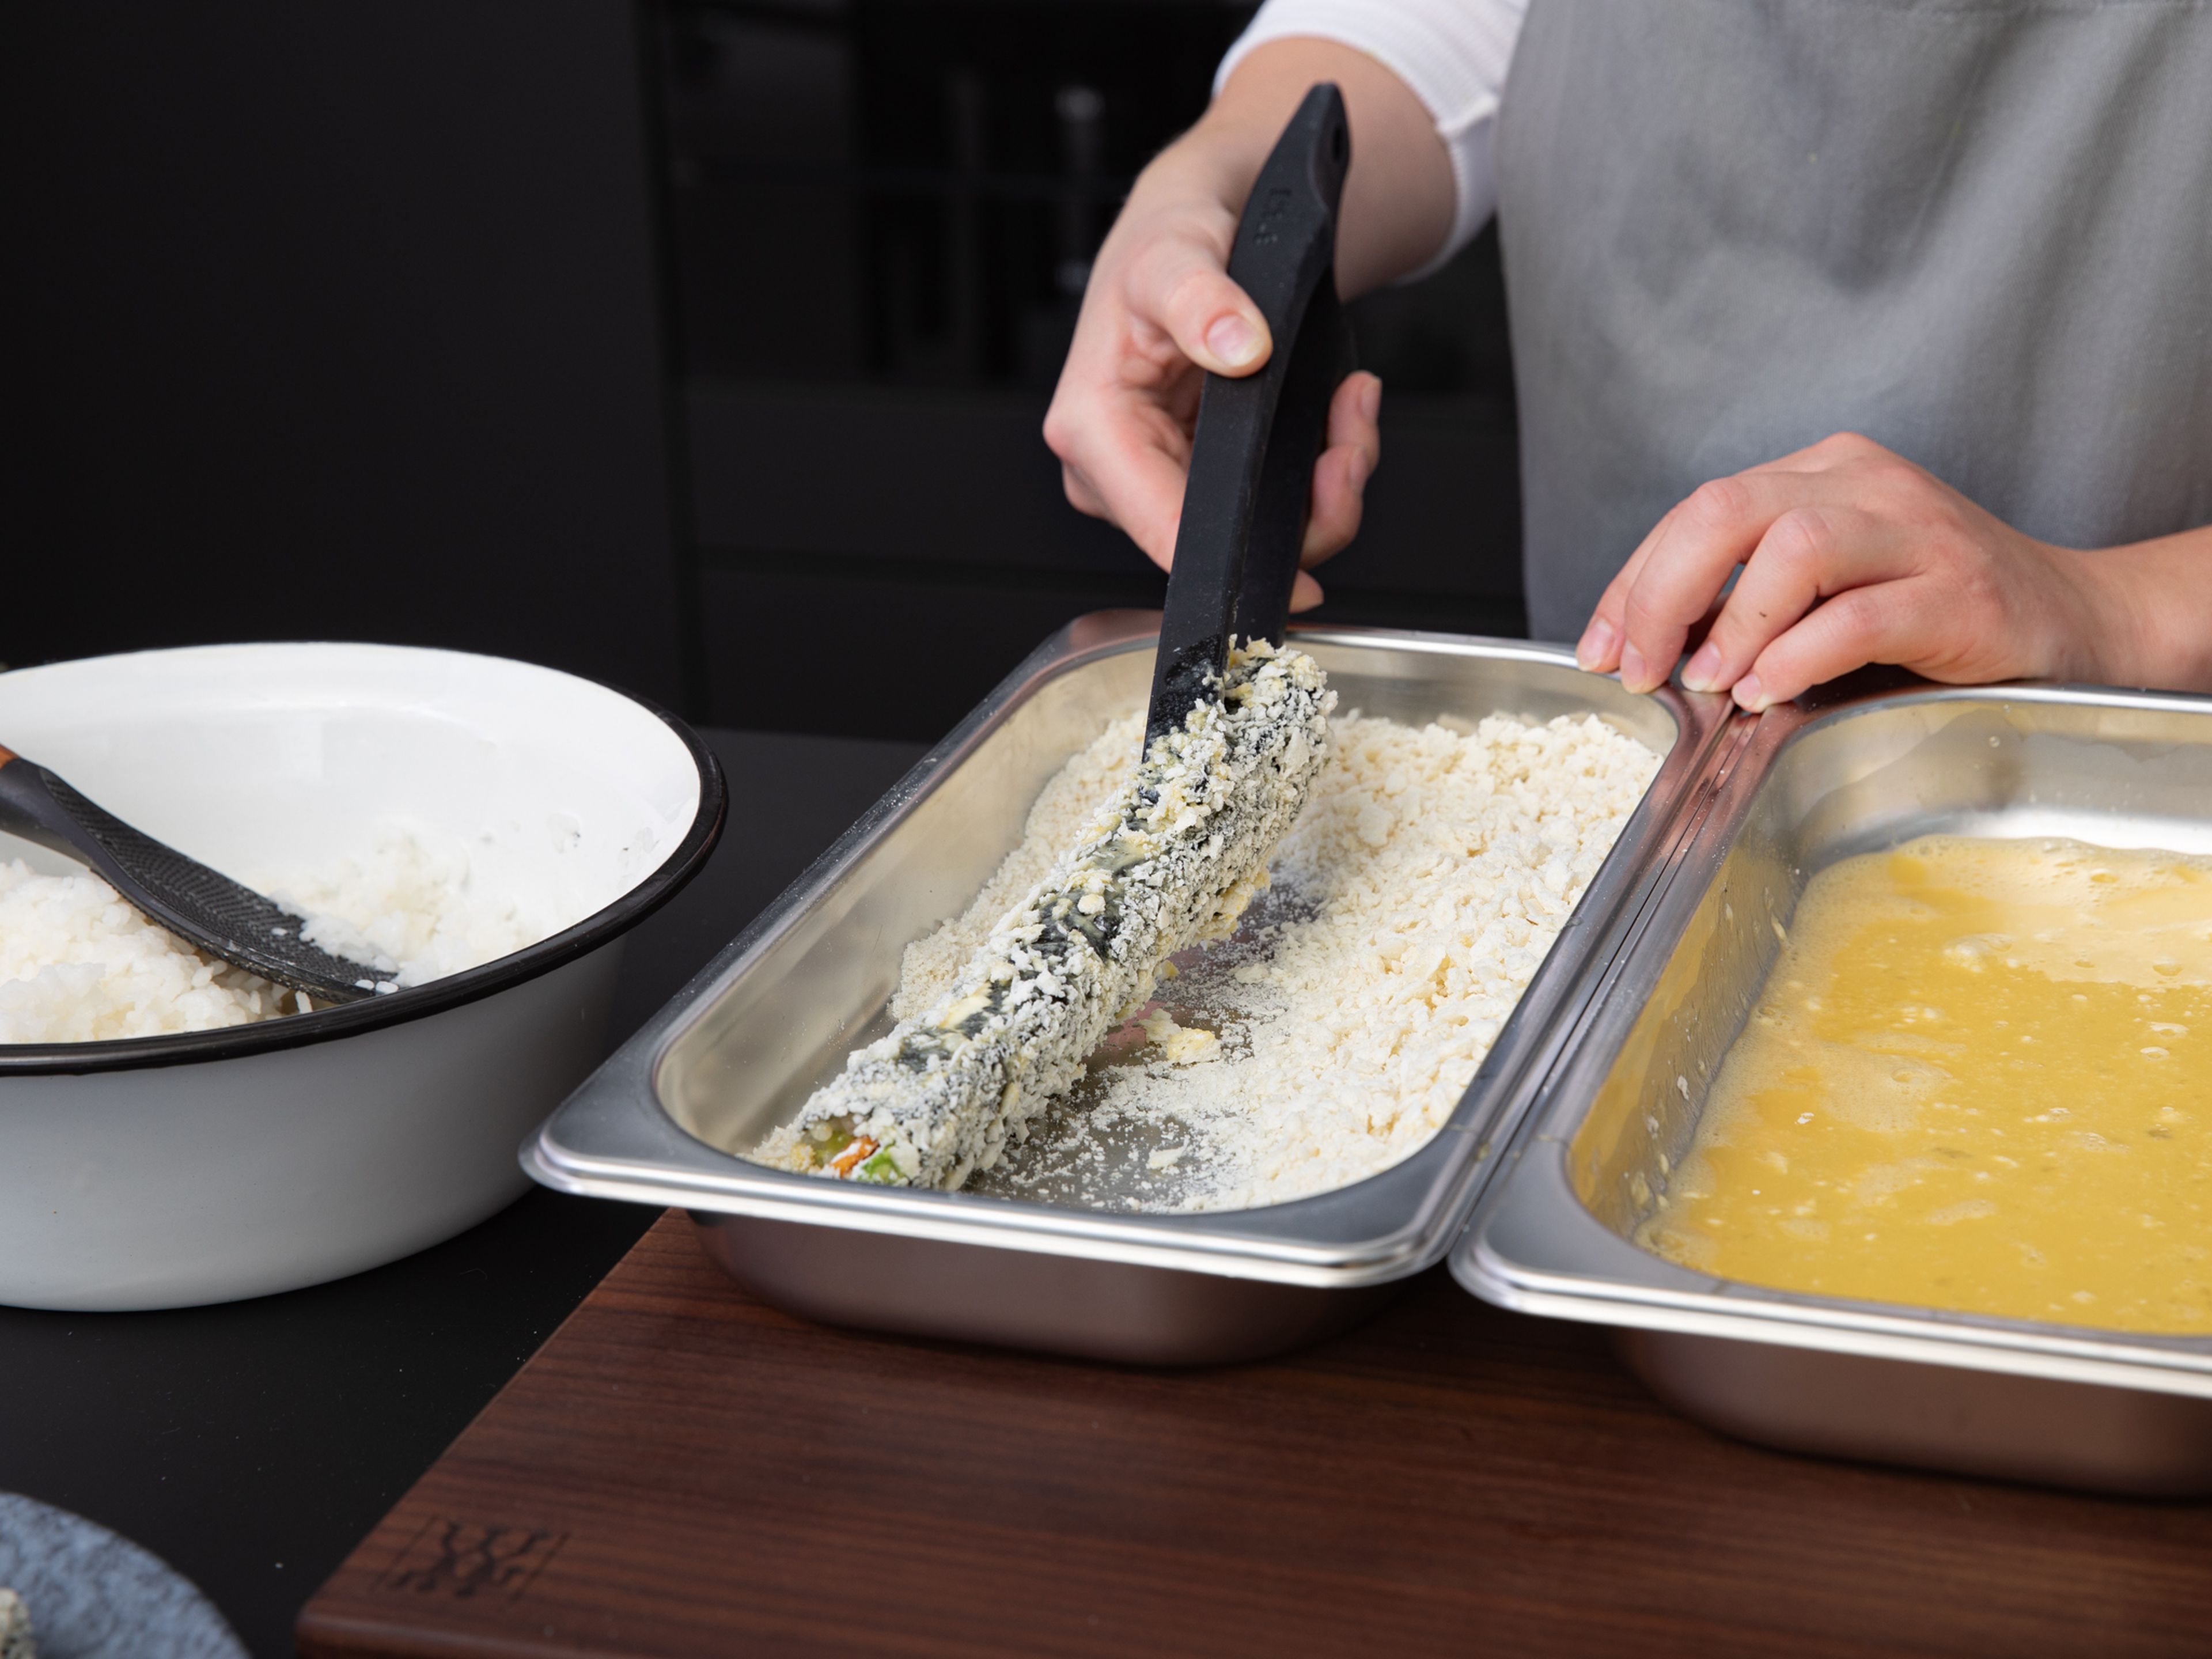 Roll together tightly using the sushi mat. Add the flour, eggs, and panko to separate deep plates or bowls. Dredge the sushi rolls first in flour, then egg, then panko.